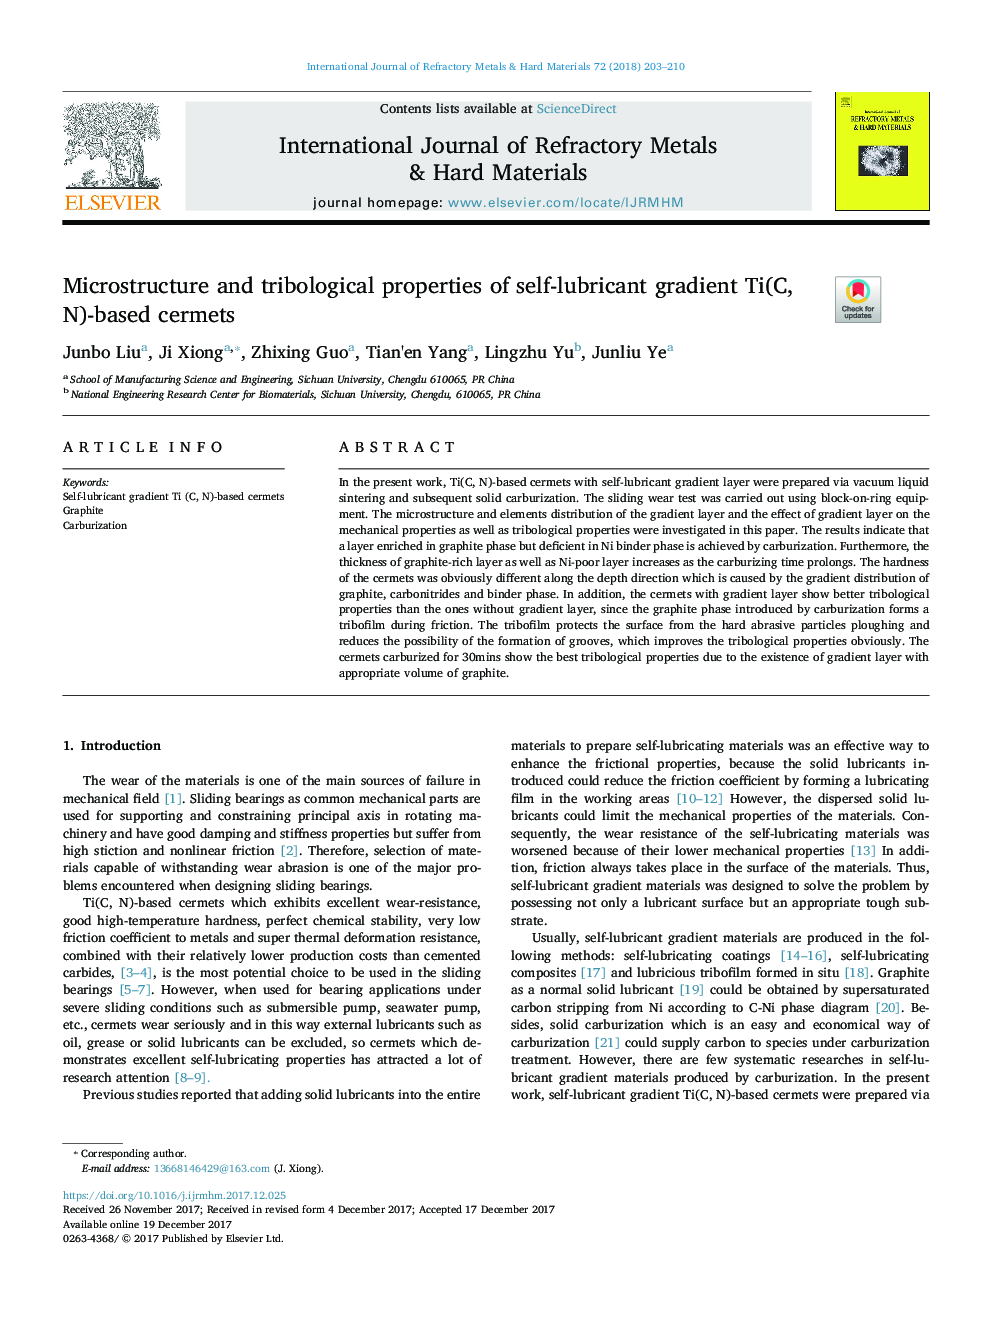 Microstructure and tribological properties of self-lubricant gradient Ti(C, N)-based cermets